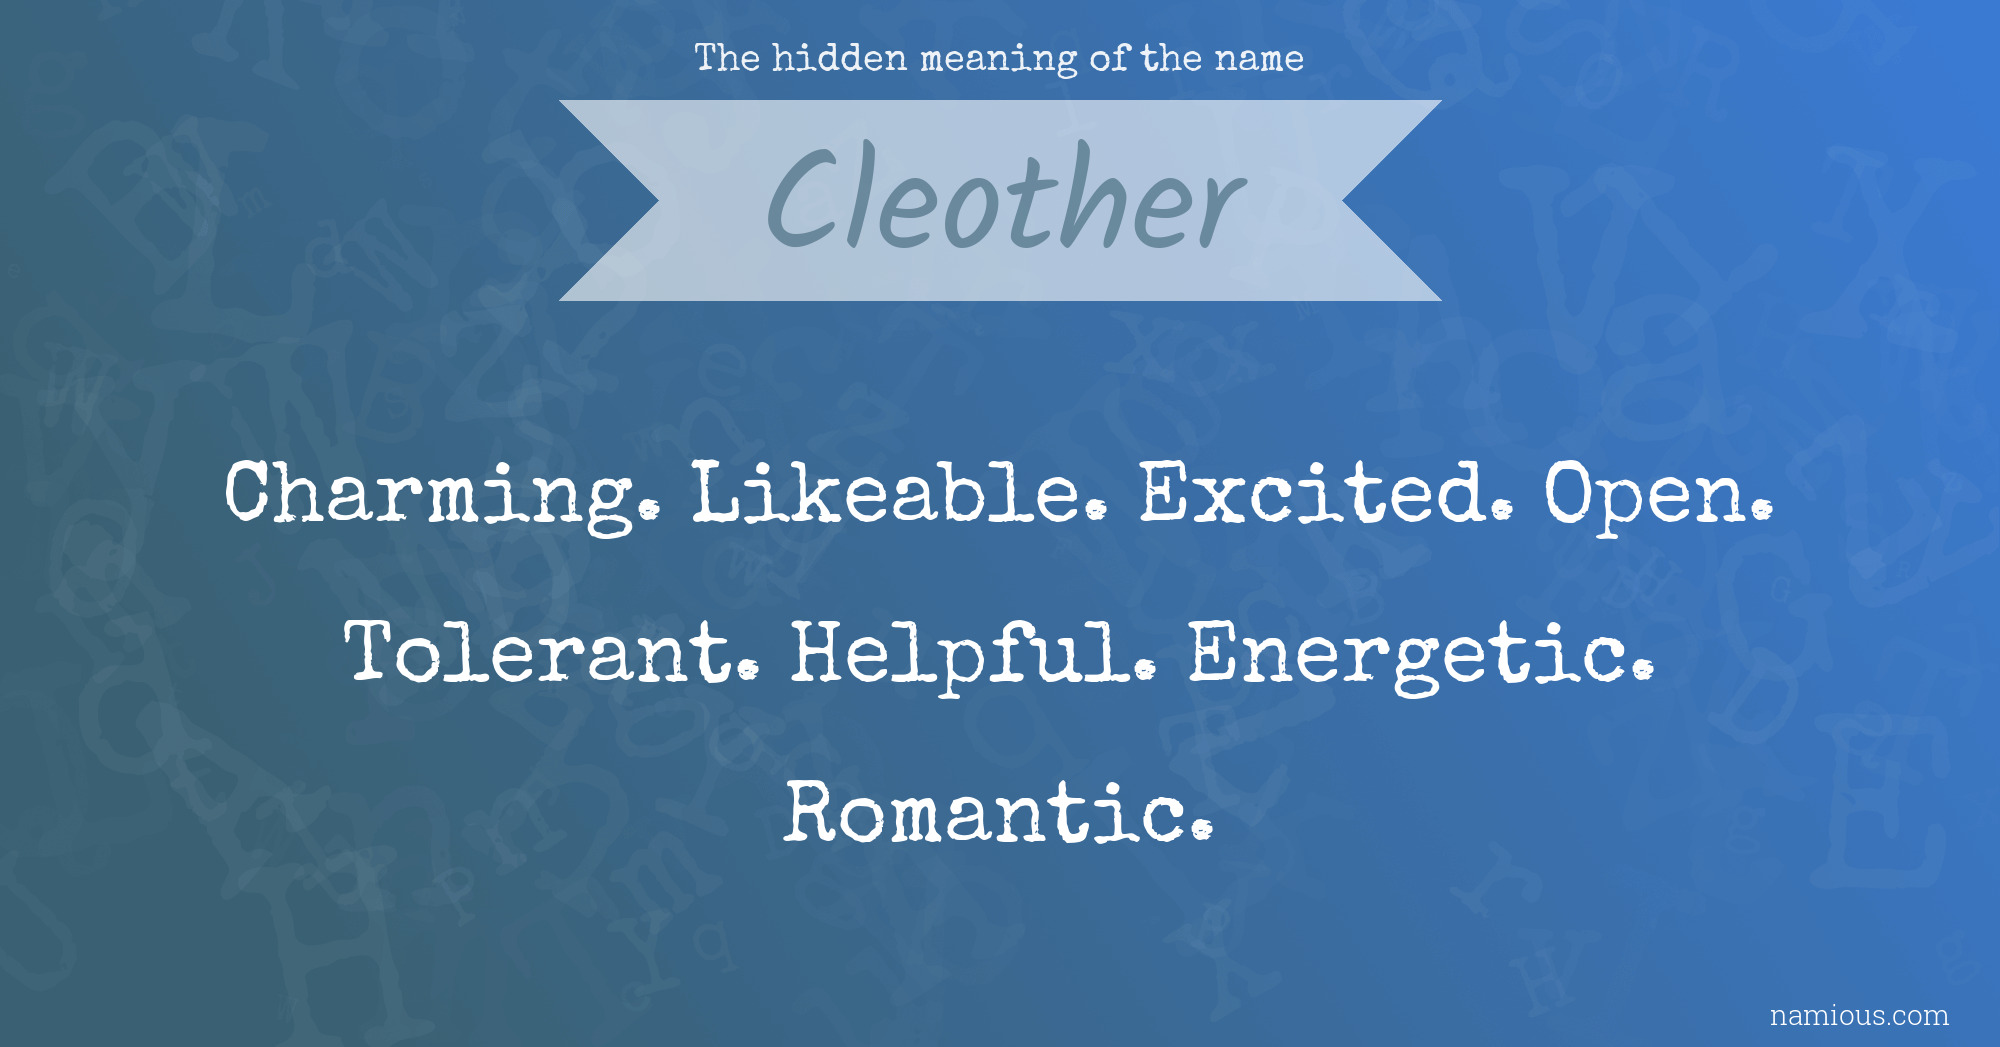 The hidden meaning of the name Cleother